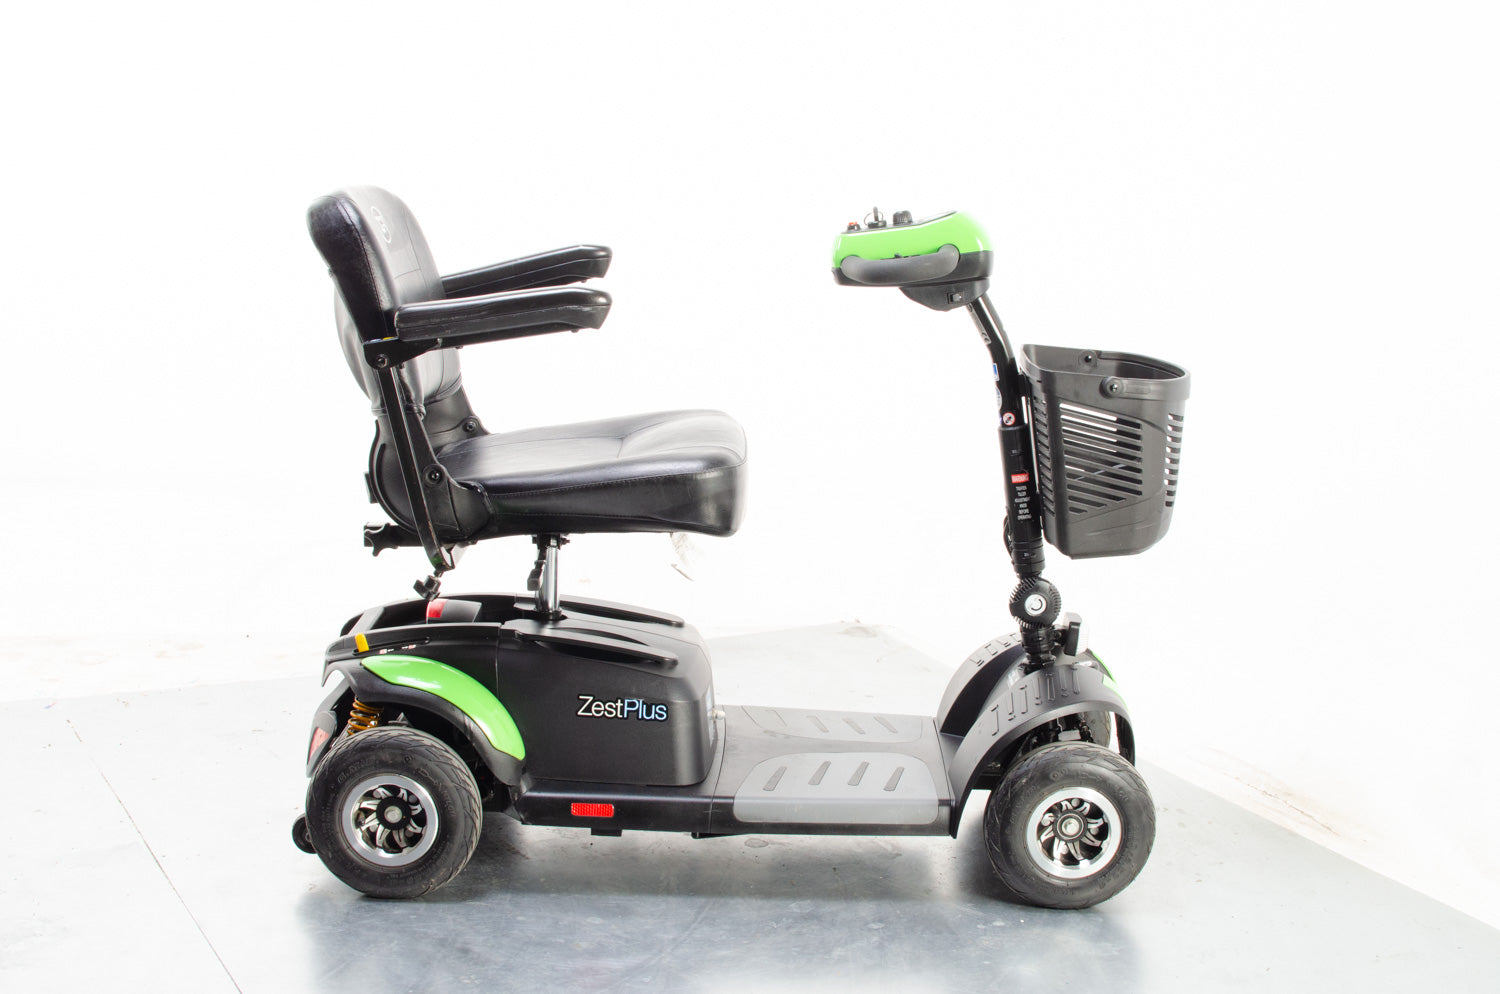 TGA Zest Plus Used Mobility Scooter Transportable Pneumatic Suspension Boot Folding